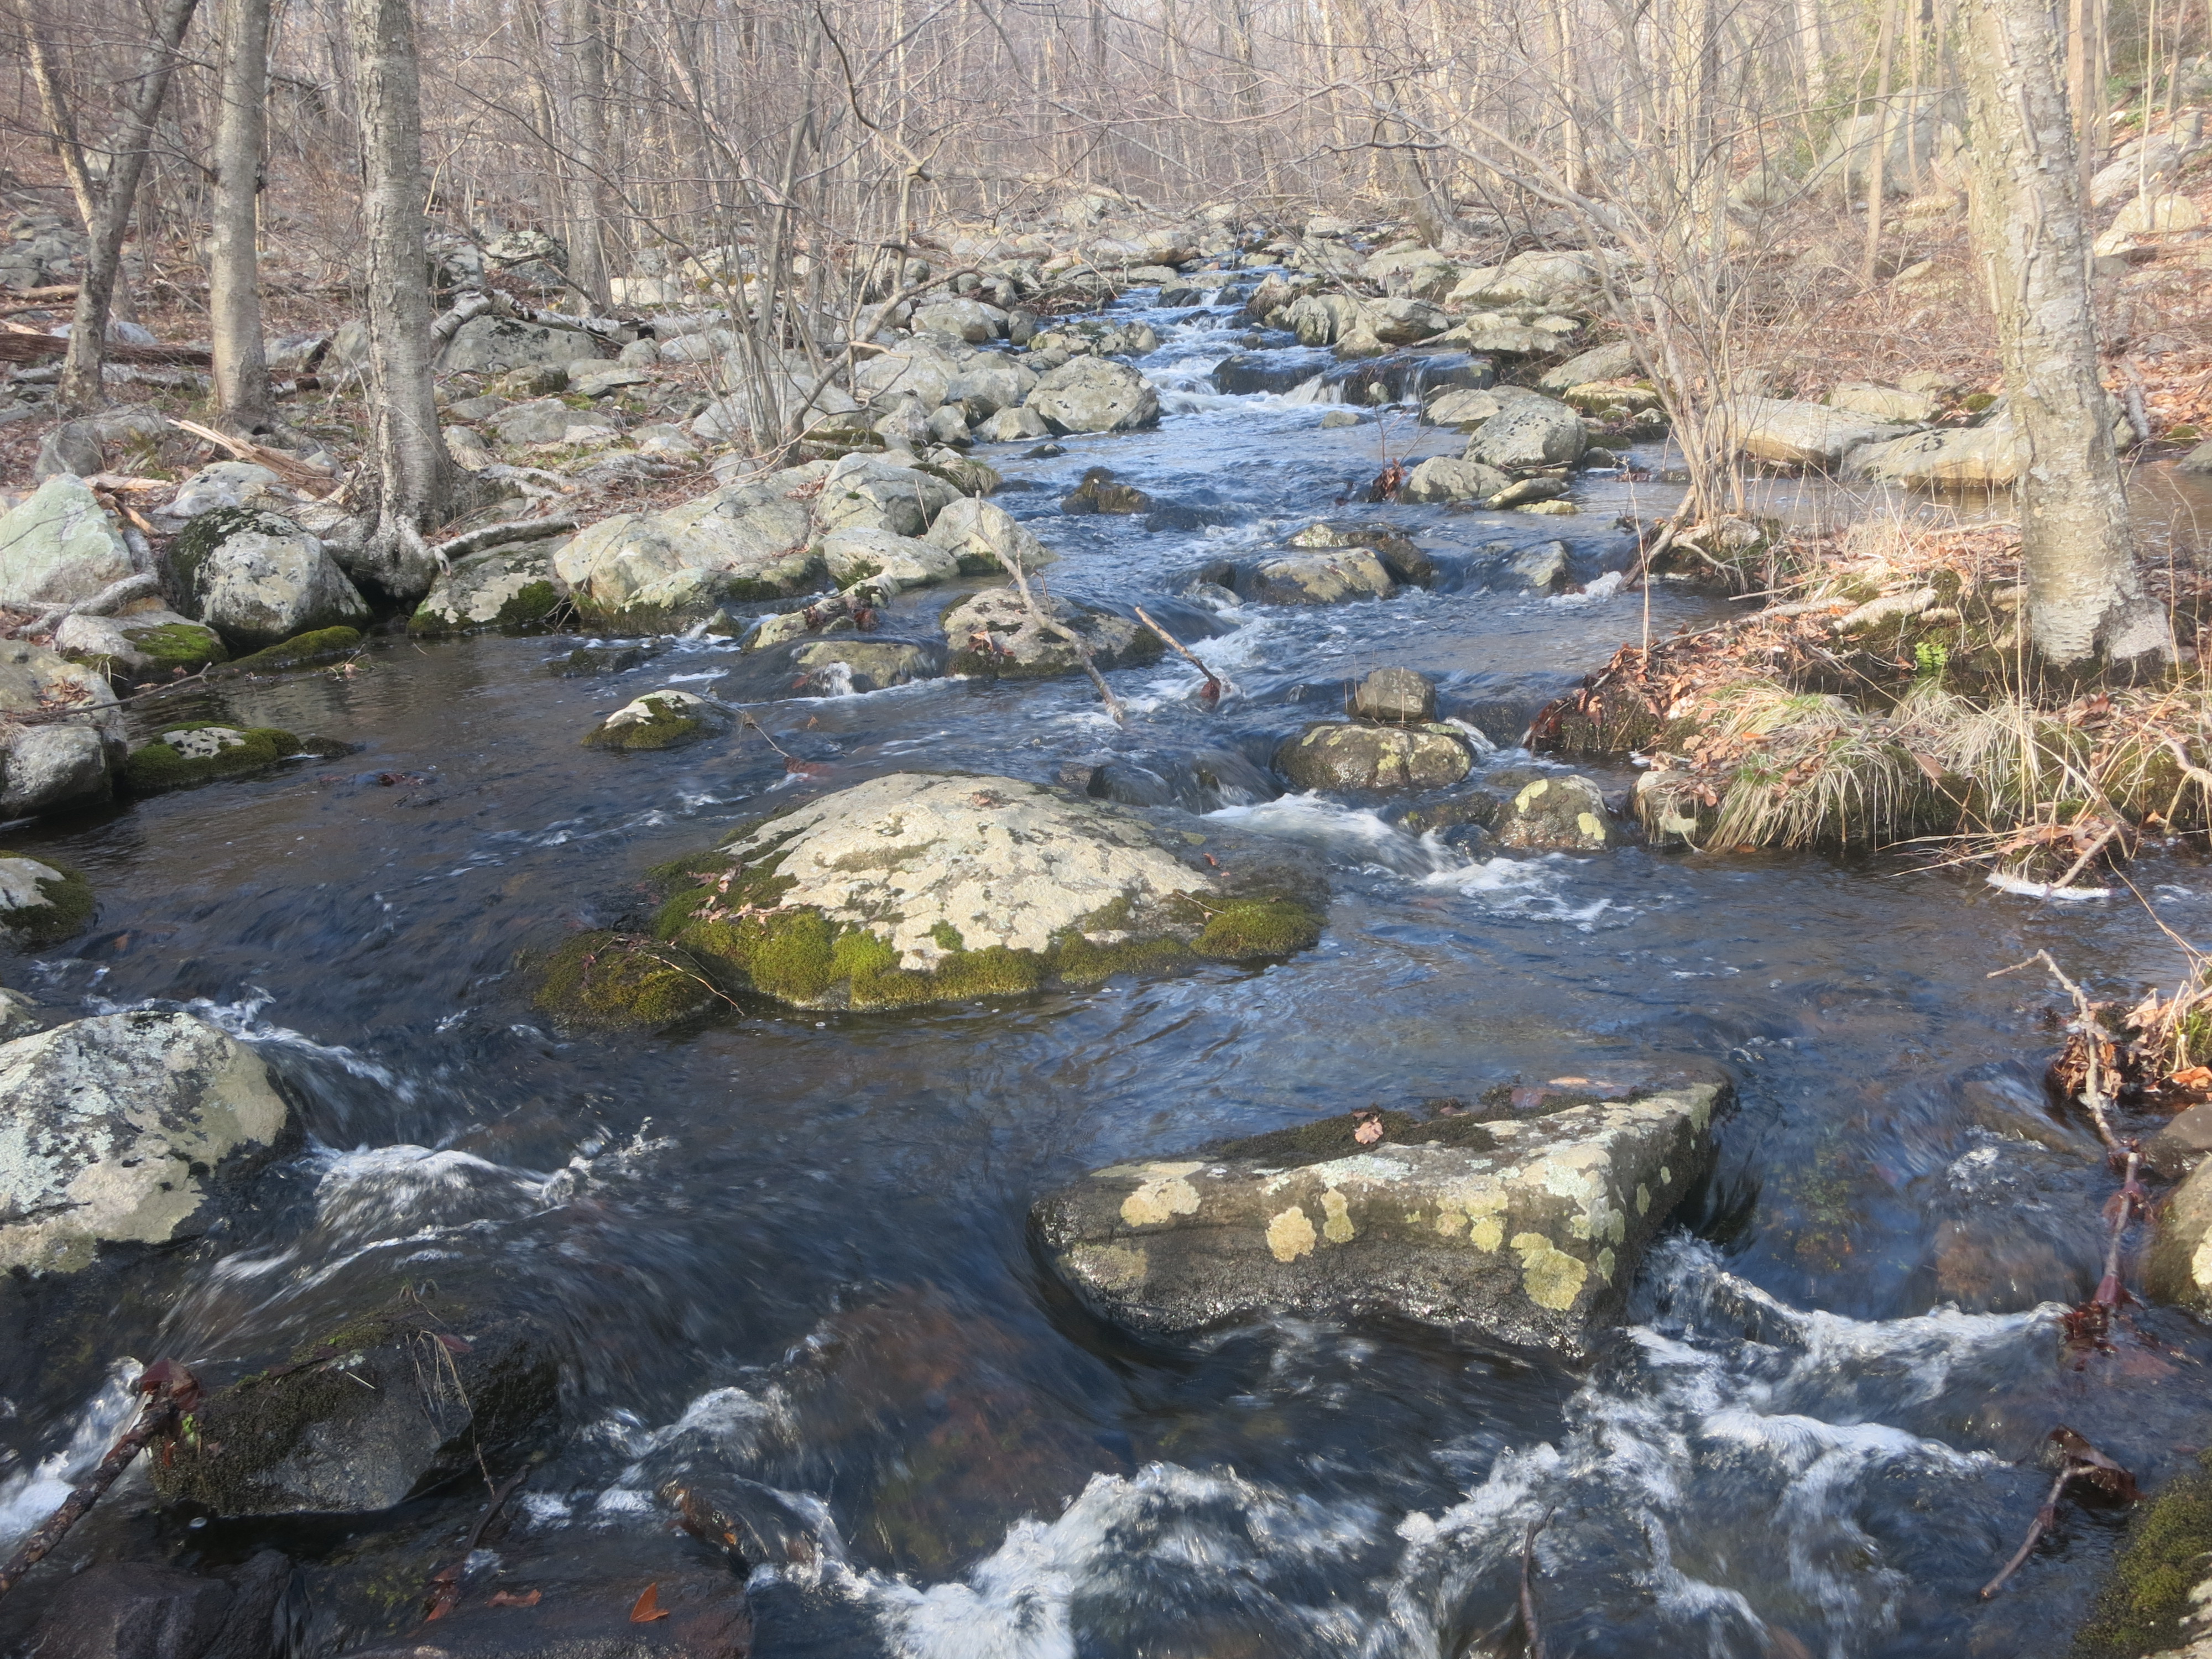 Stream crossing on the Red Back Trail in Sterling Forest State Park. Photo by Daniel Chazin.